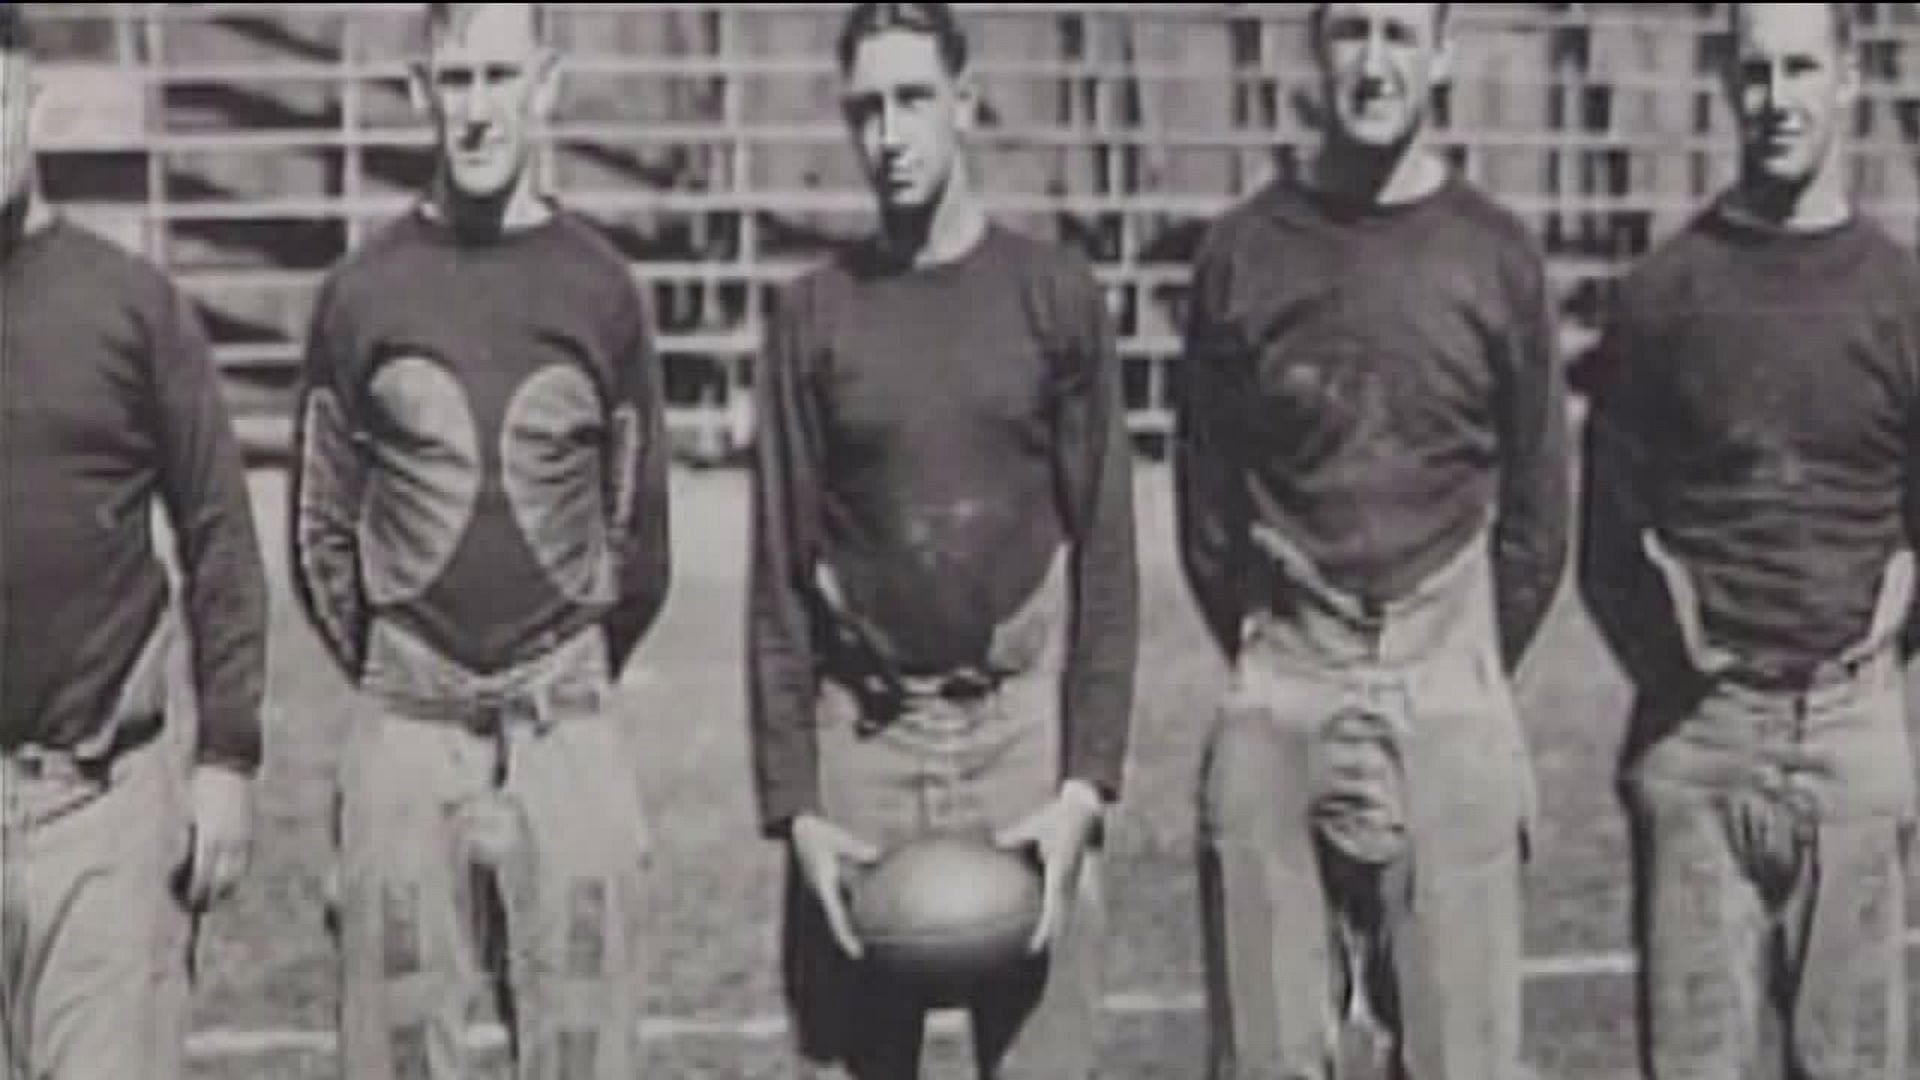 The Pottsville Maroons had their 1925 title taken away after being suspended. Photo via wnep.com.